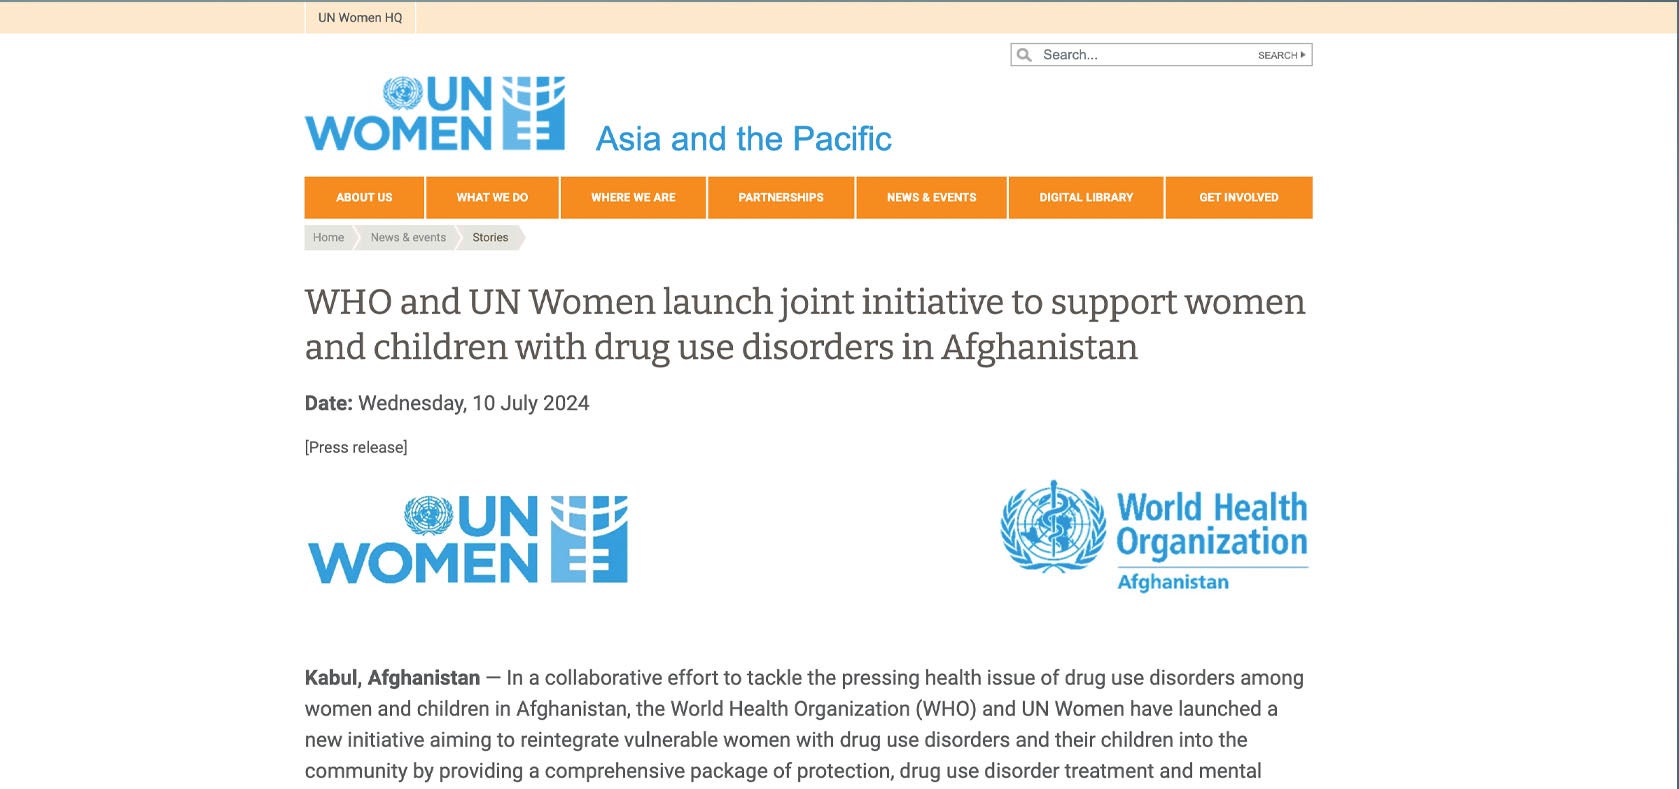 WHO and UN Women launch joint initiative to support women and children with drug use disorders in Afghanistan